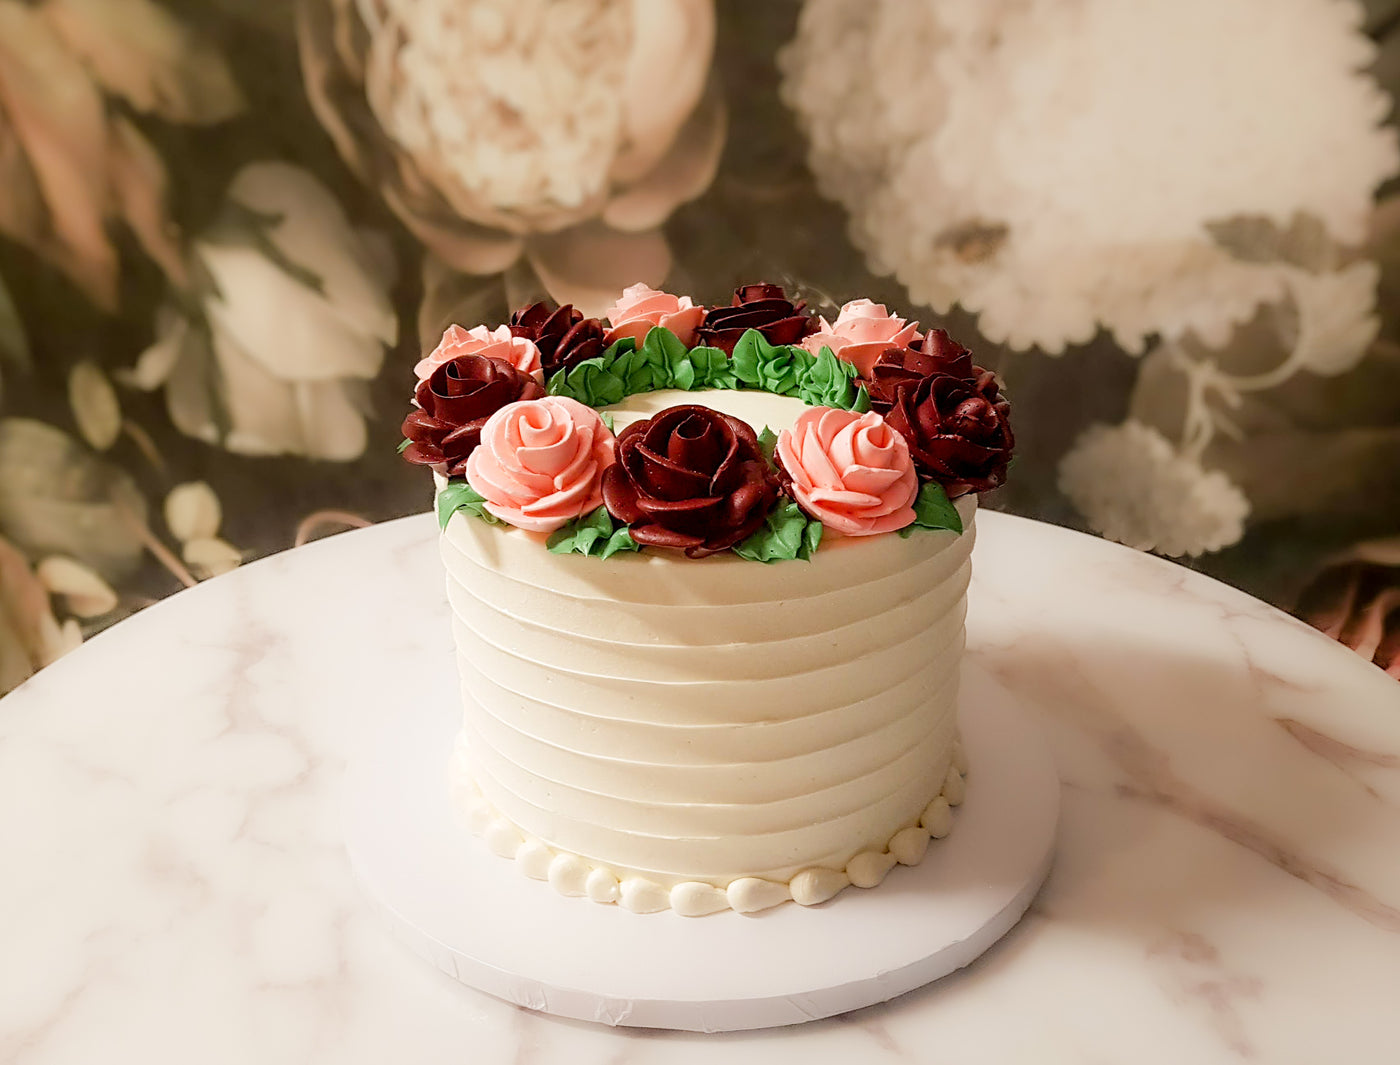 Large roses arranged in a wreath on your cake to create a rustic bohemian vibe- both simple and elegant.  A great centerpiece for your party.  Customize: Flower colors, size, flavor